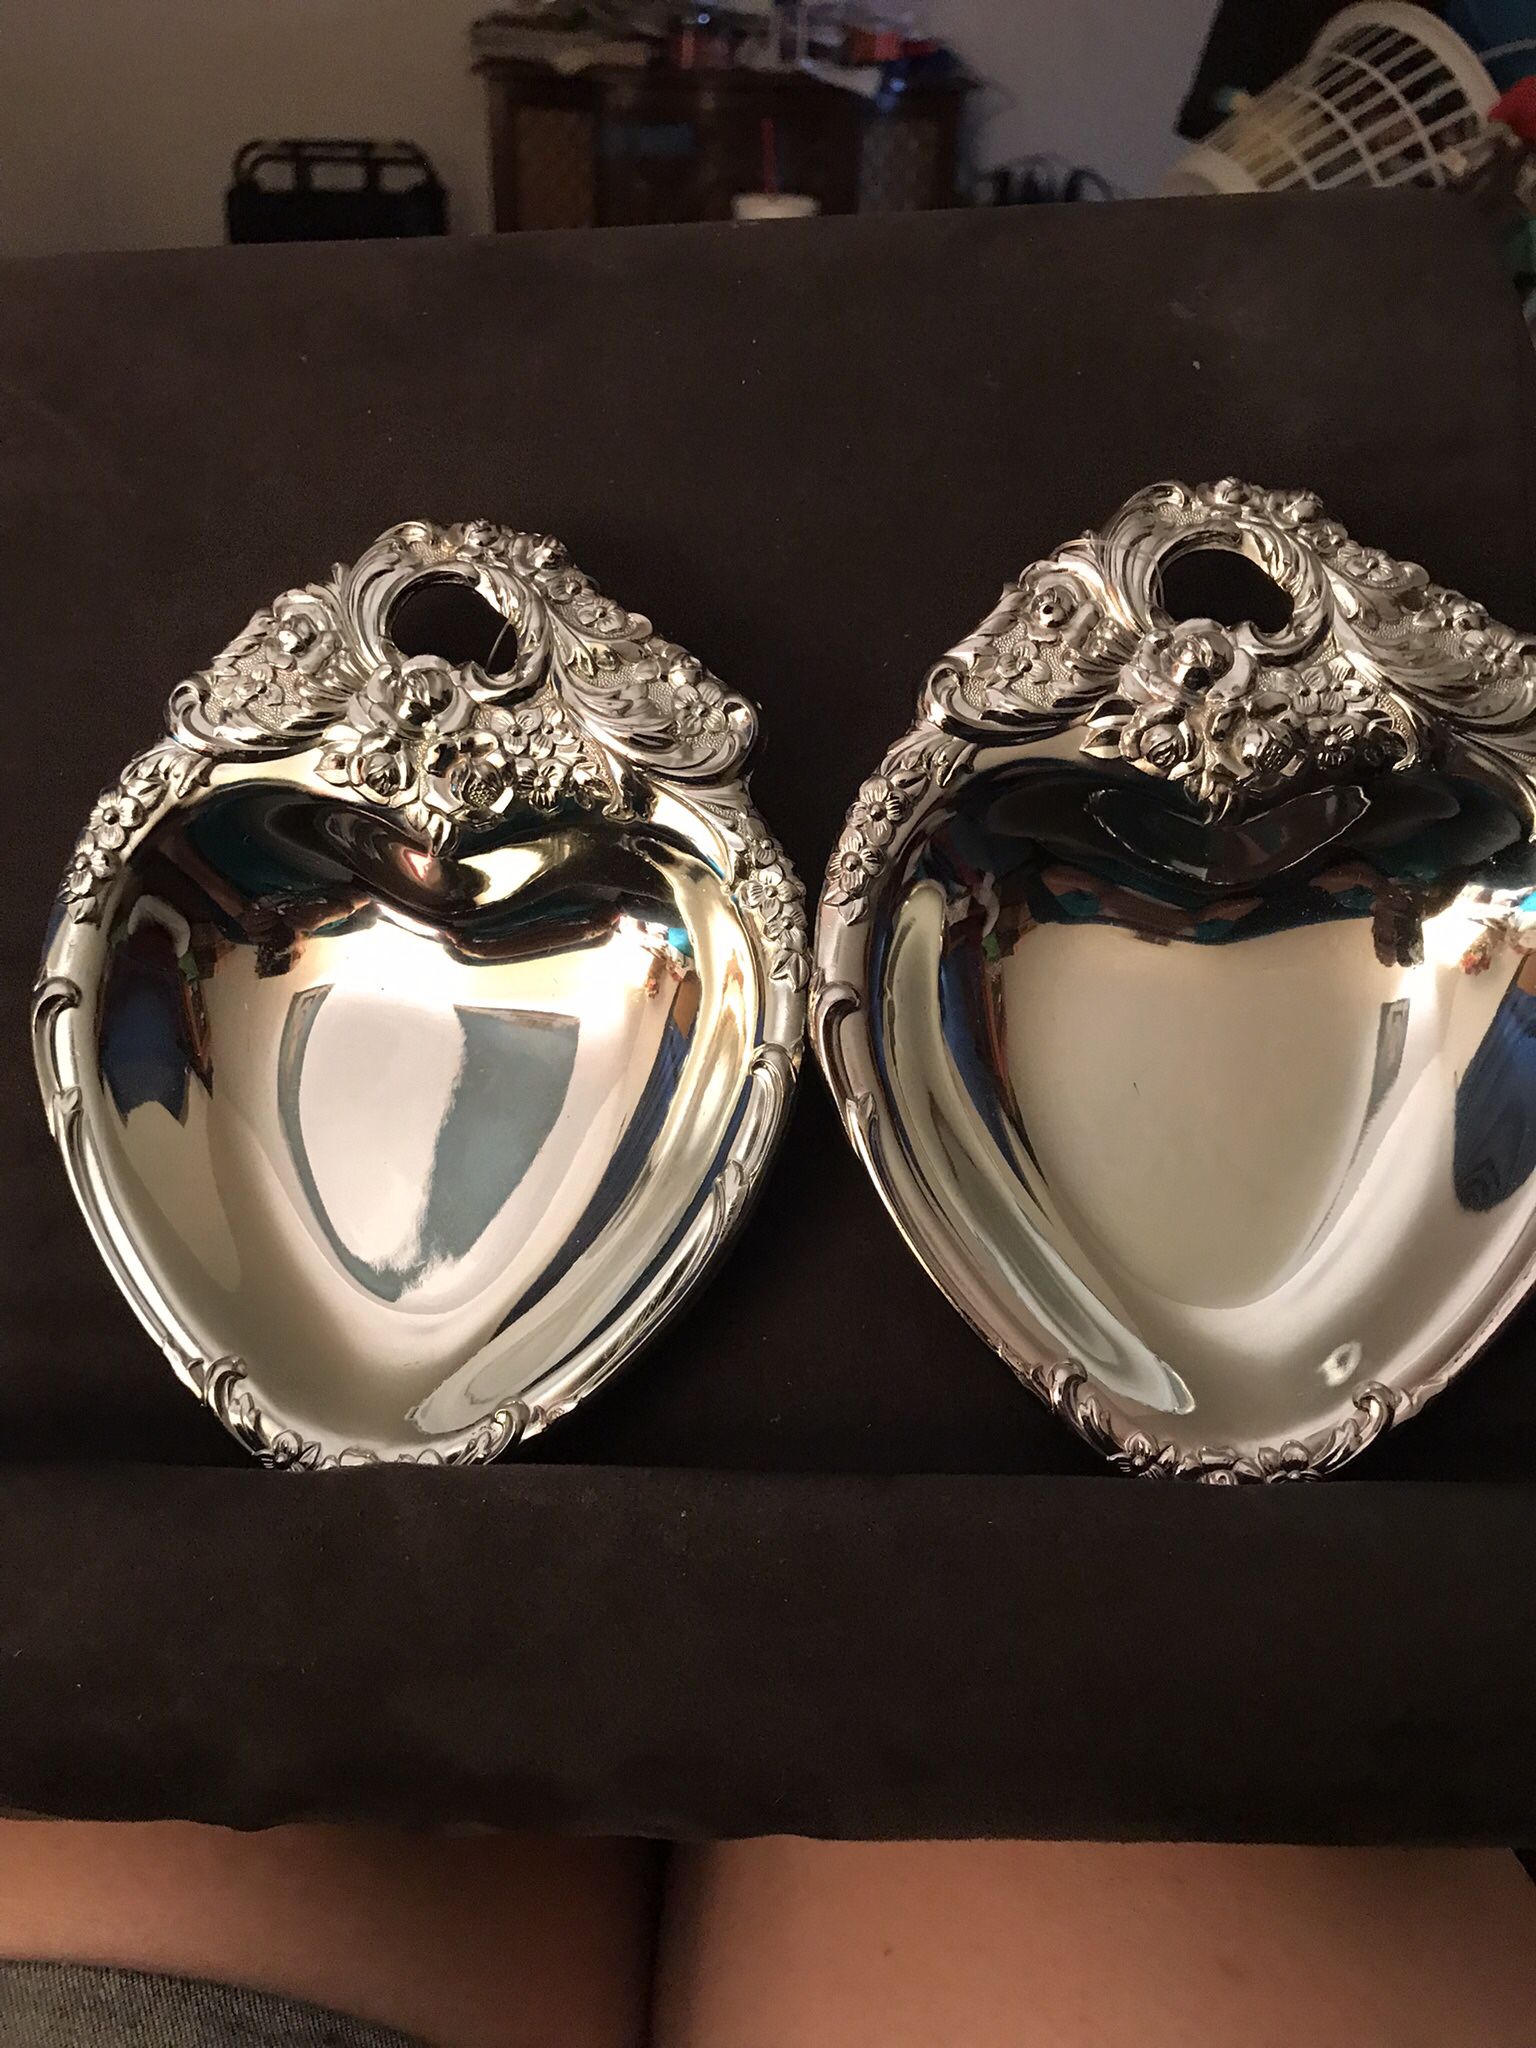 2 Himark Enterprises, Inc. Tarnished Protected Silverplate Trinket Dishes.  Made In Japan. No Scratches. Pet/smoke Free Home.